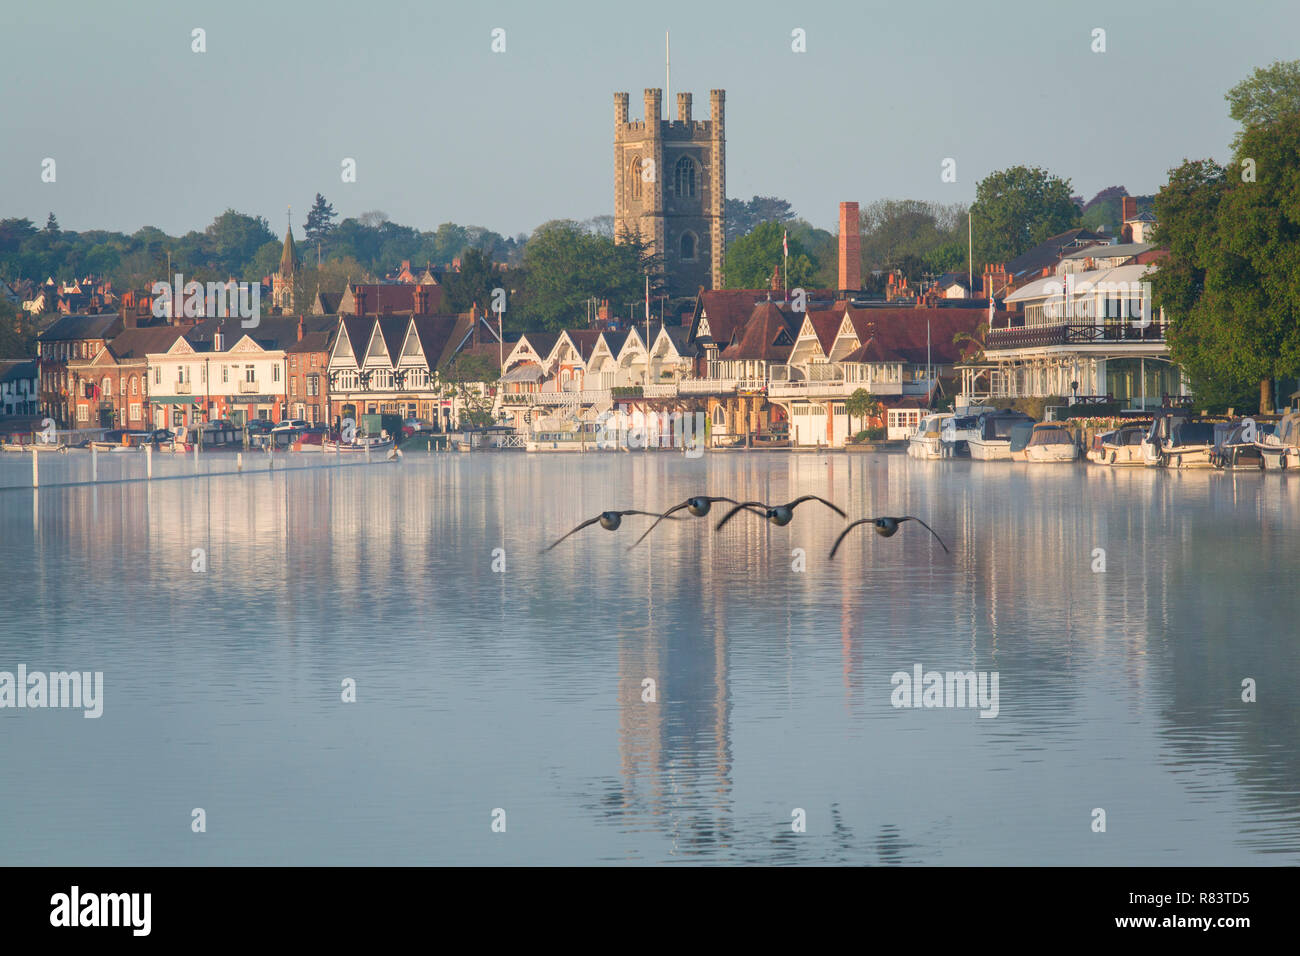 Looking South across the Thames towards the picturesque town of Henley-on-Thames, Oxfordshire  with a flock of Canada Geese Stock Photo